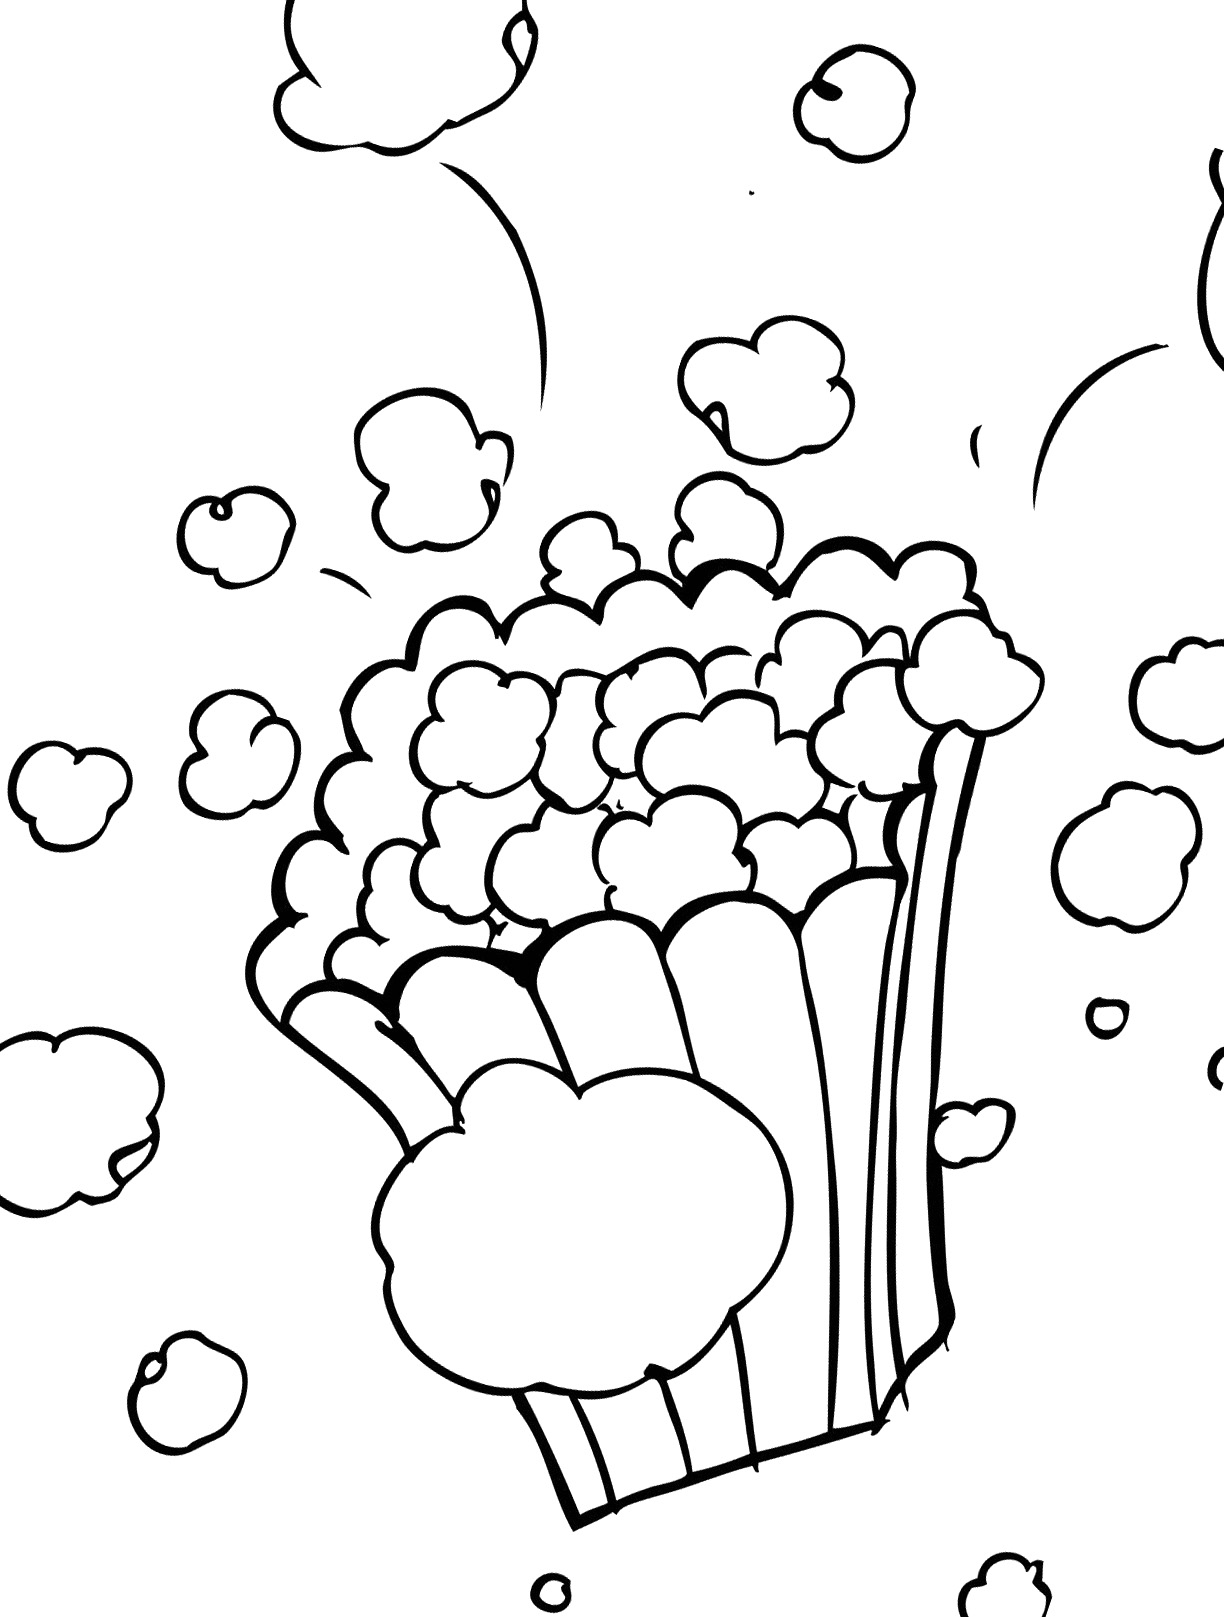 Yummy The Cheese Coloring Pages